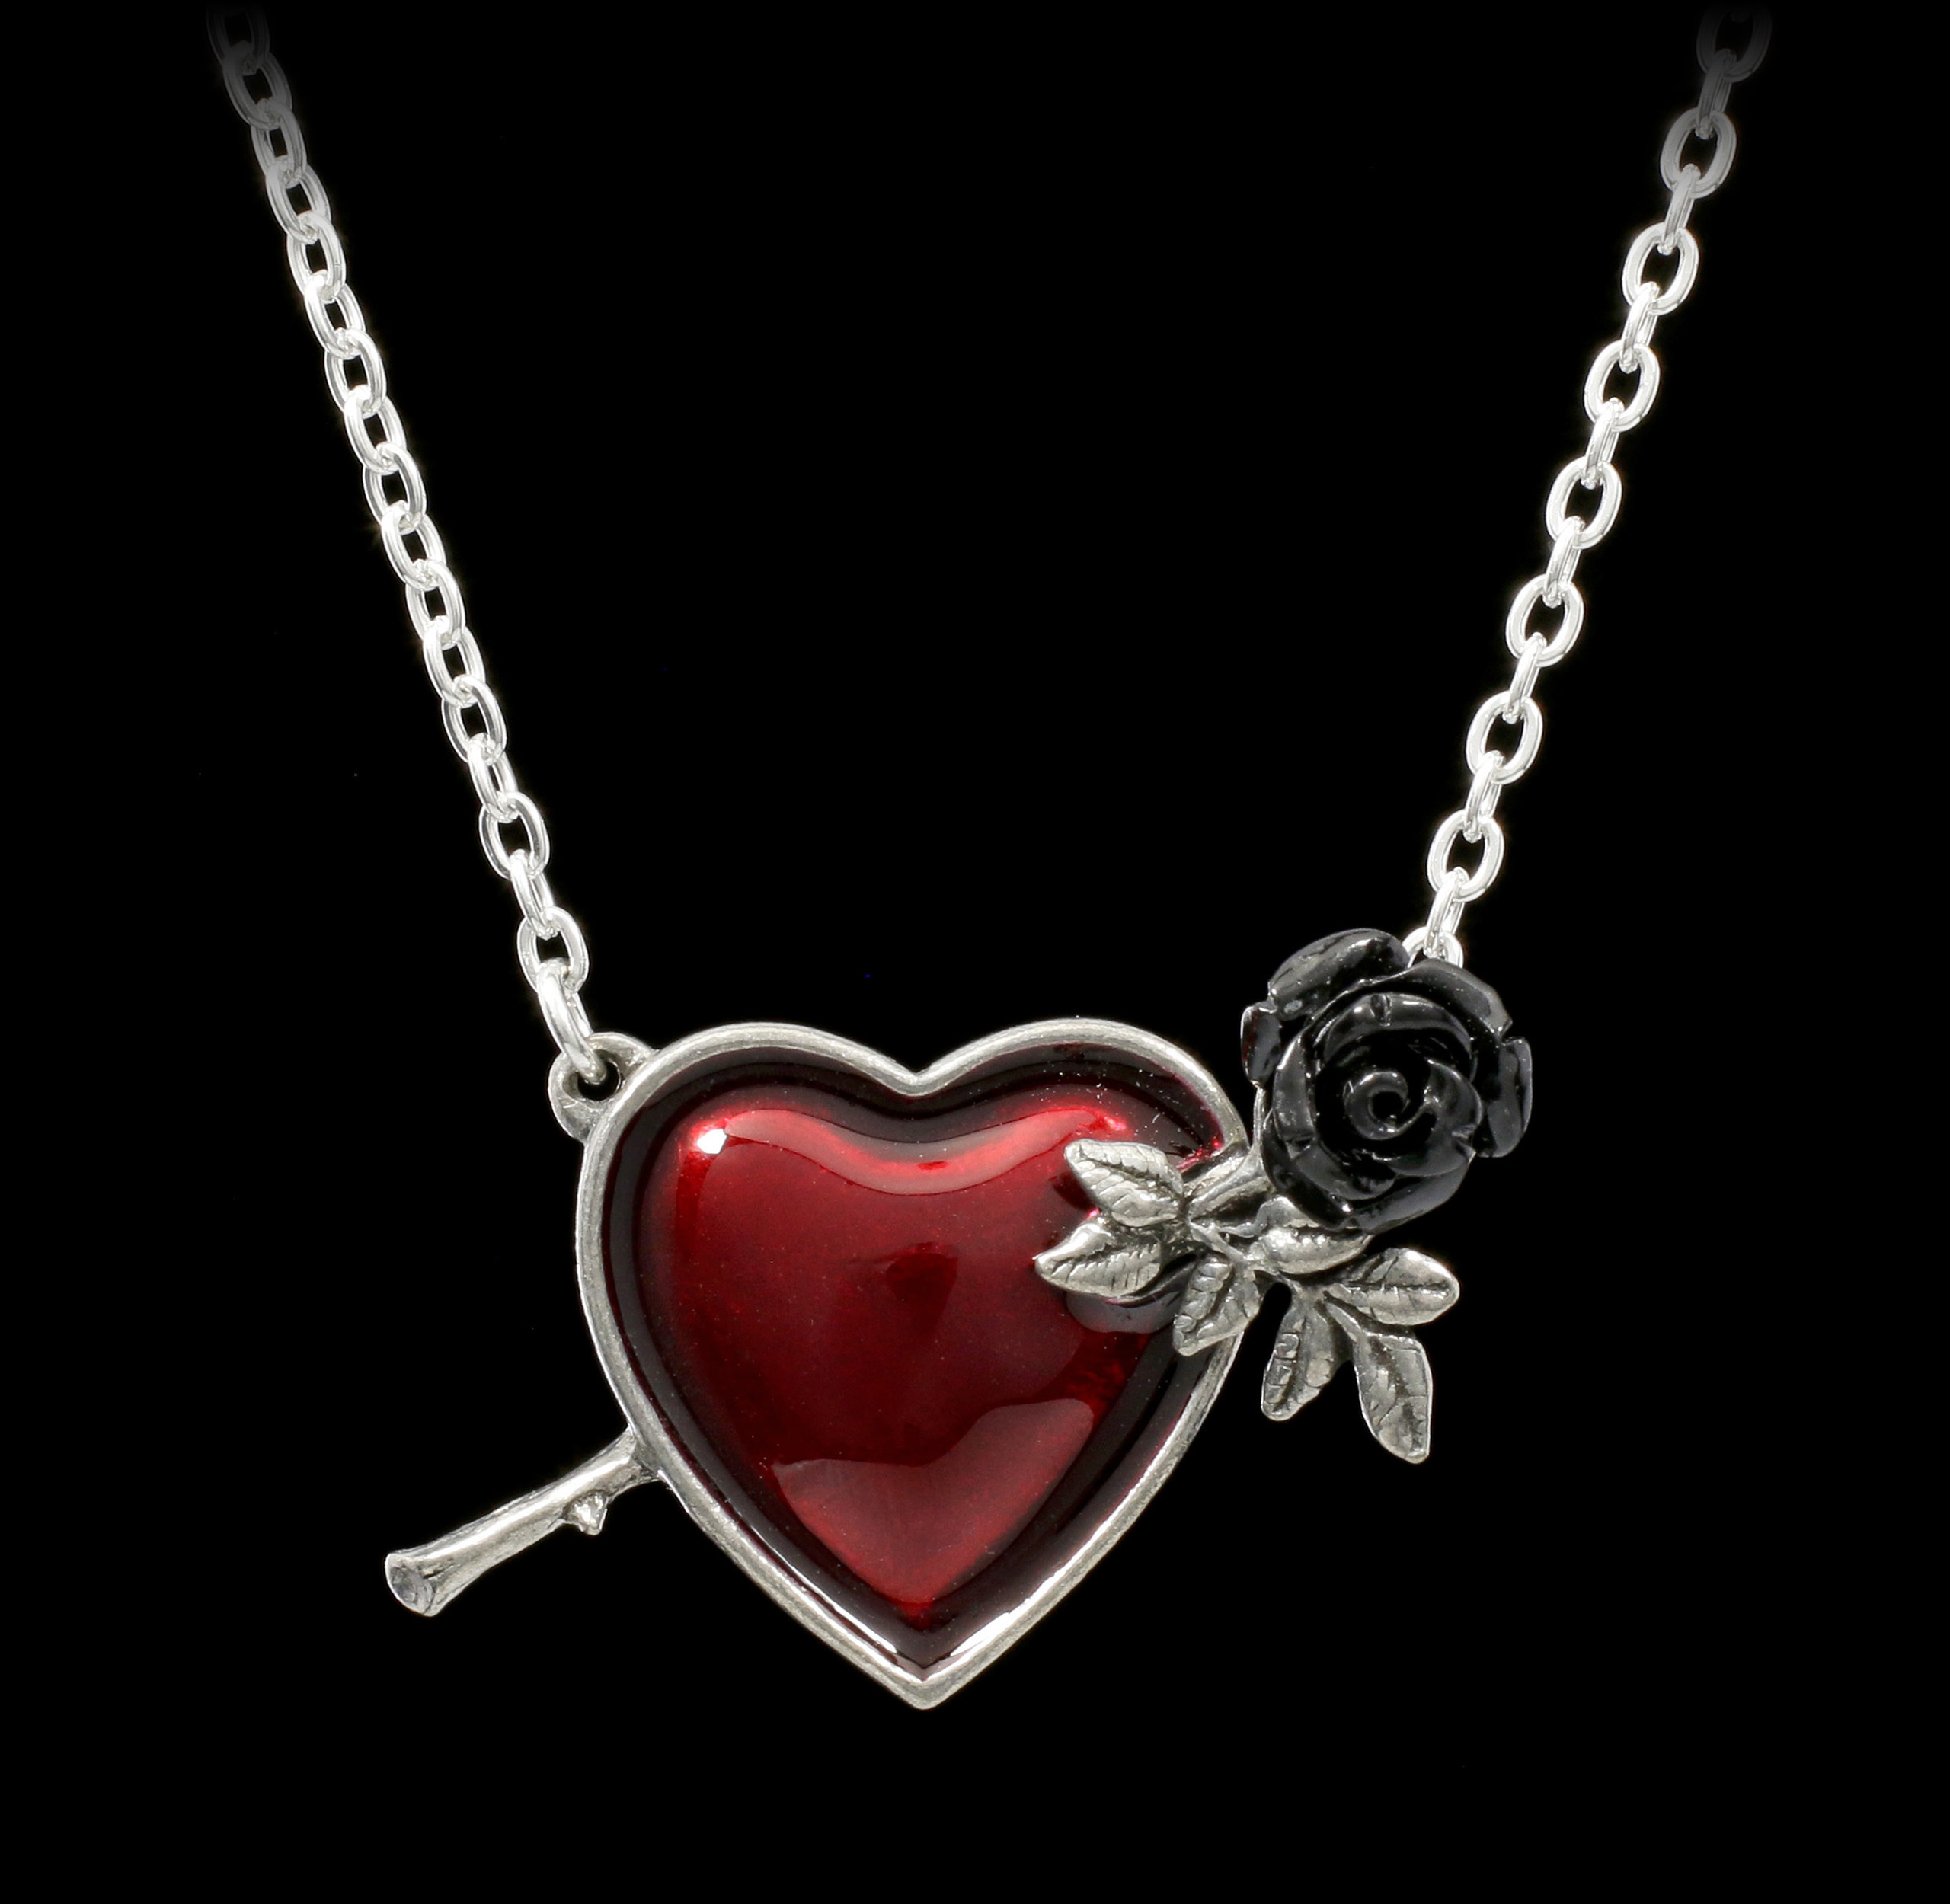 Alchemy Heart Necklace - Wounded by Love.